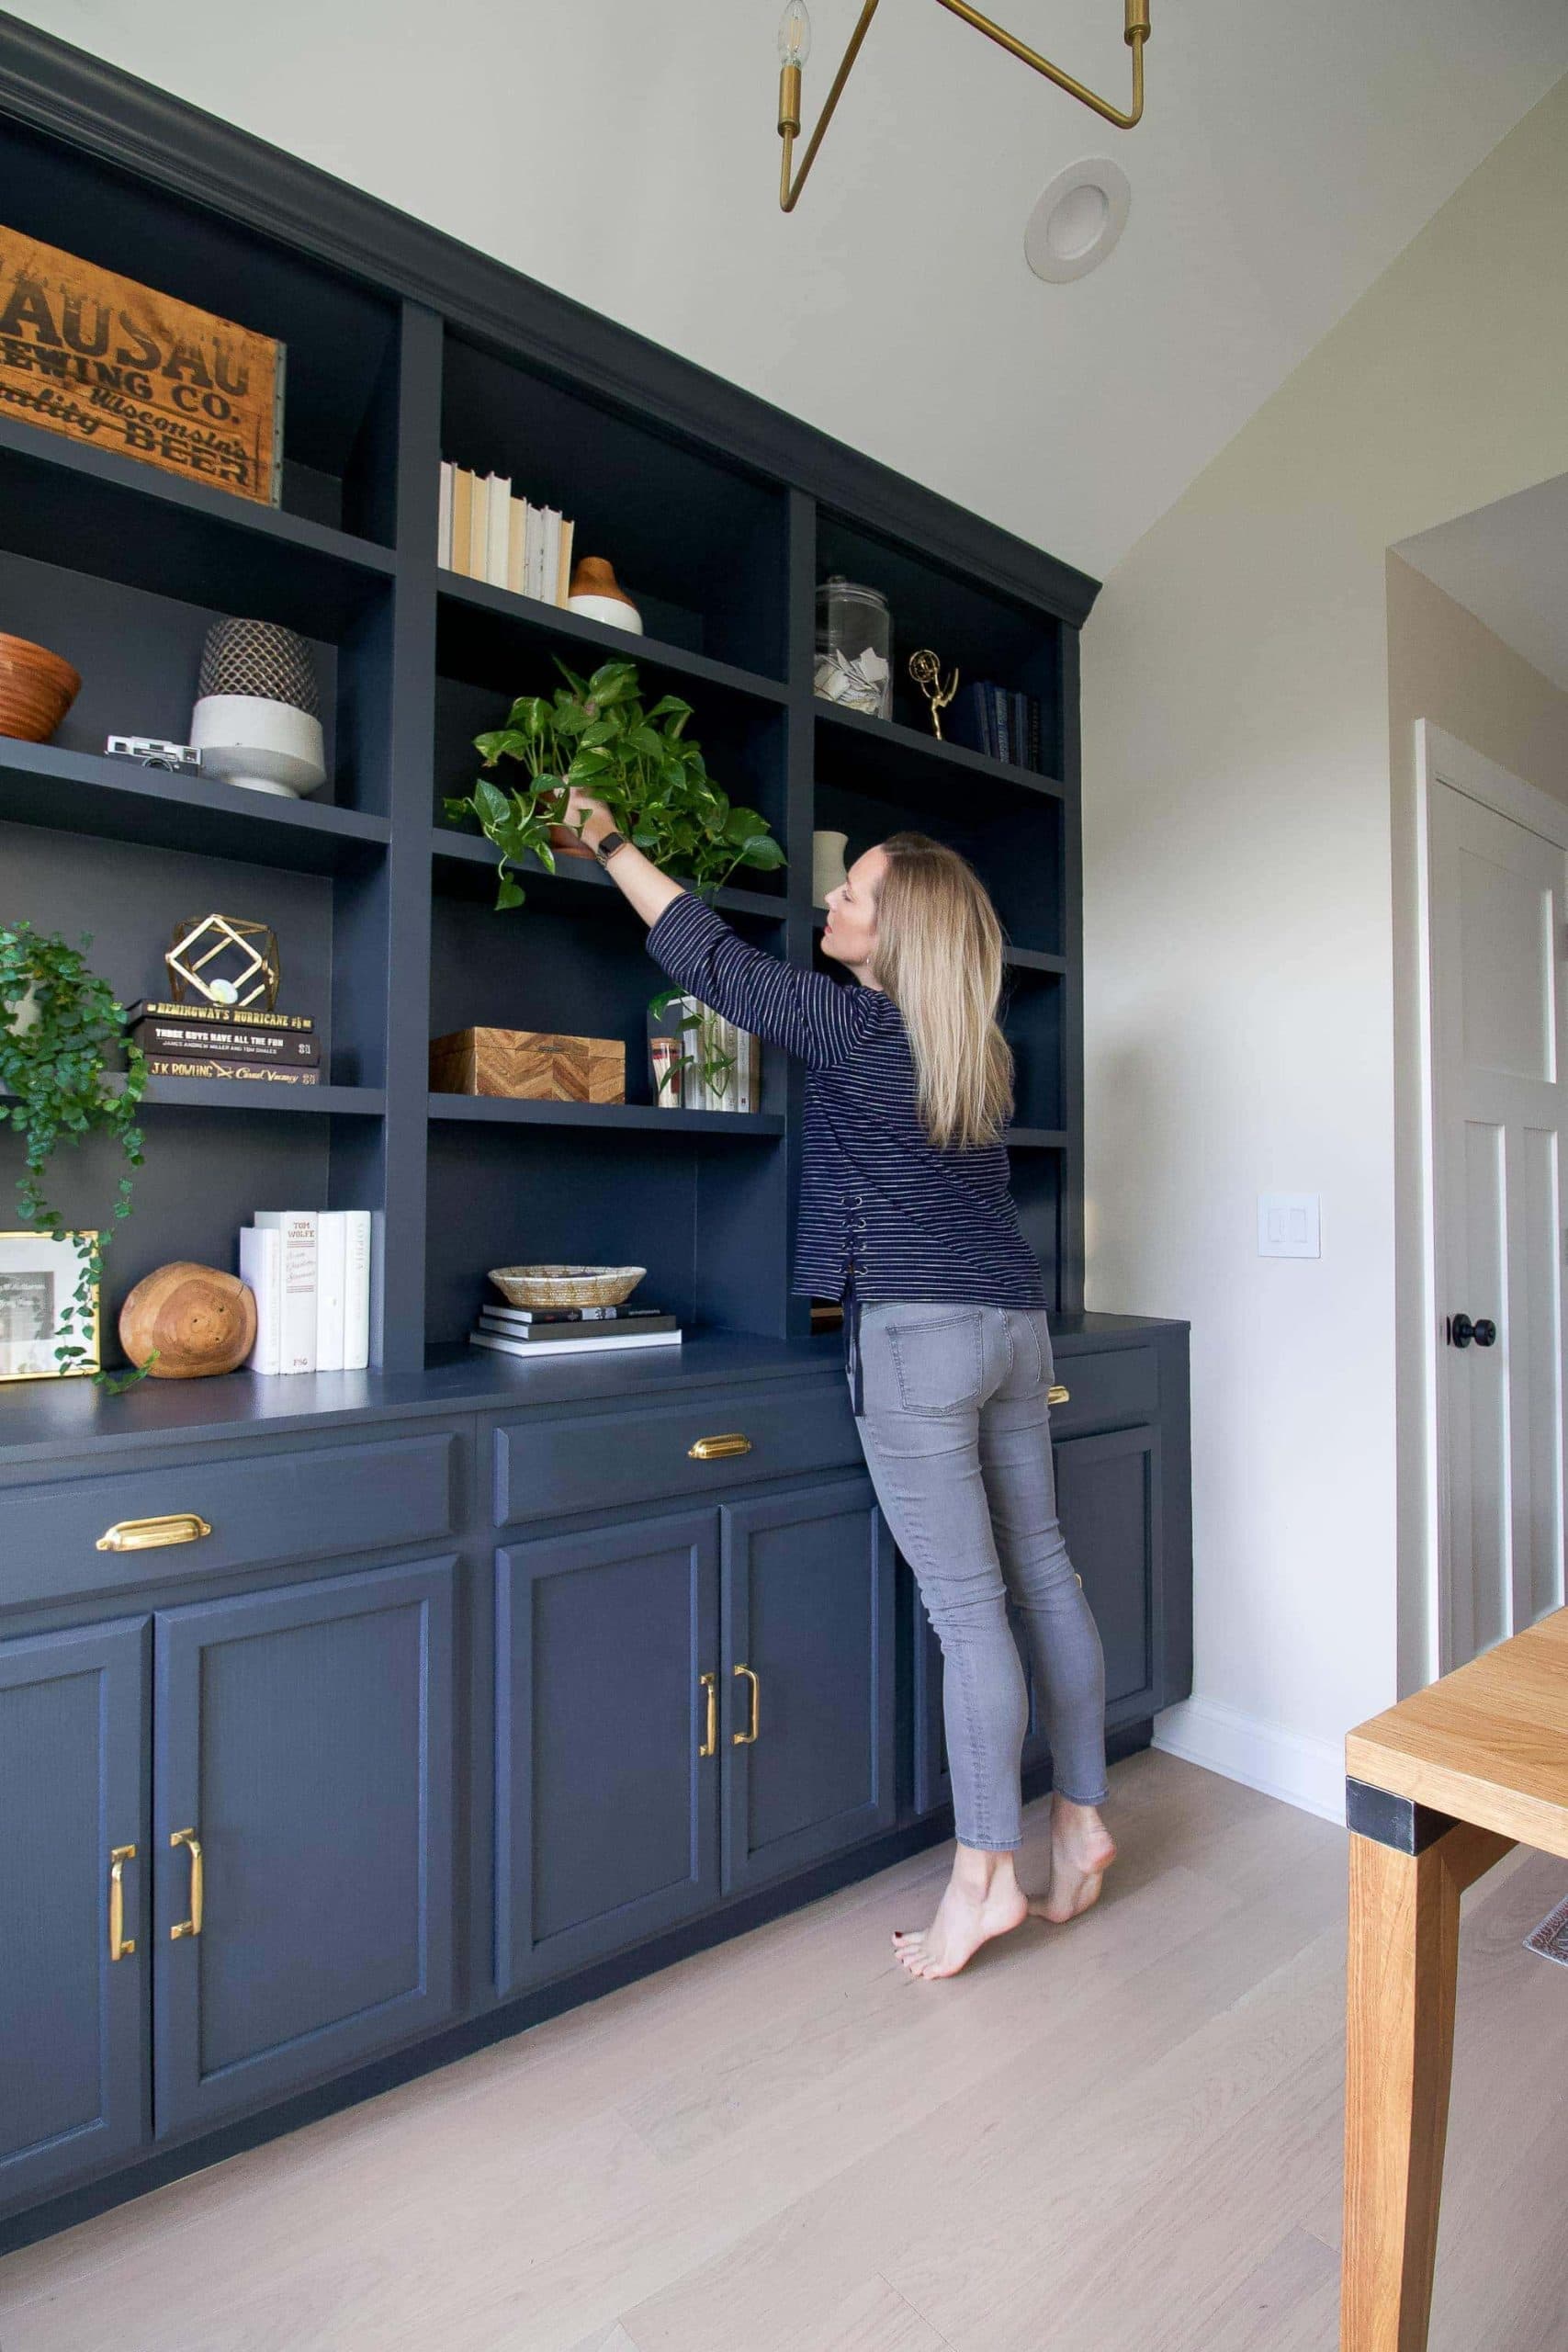 2021 home goals to organize our office built-ins